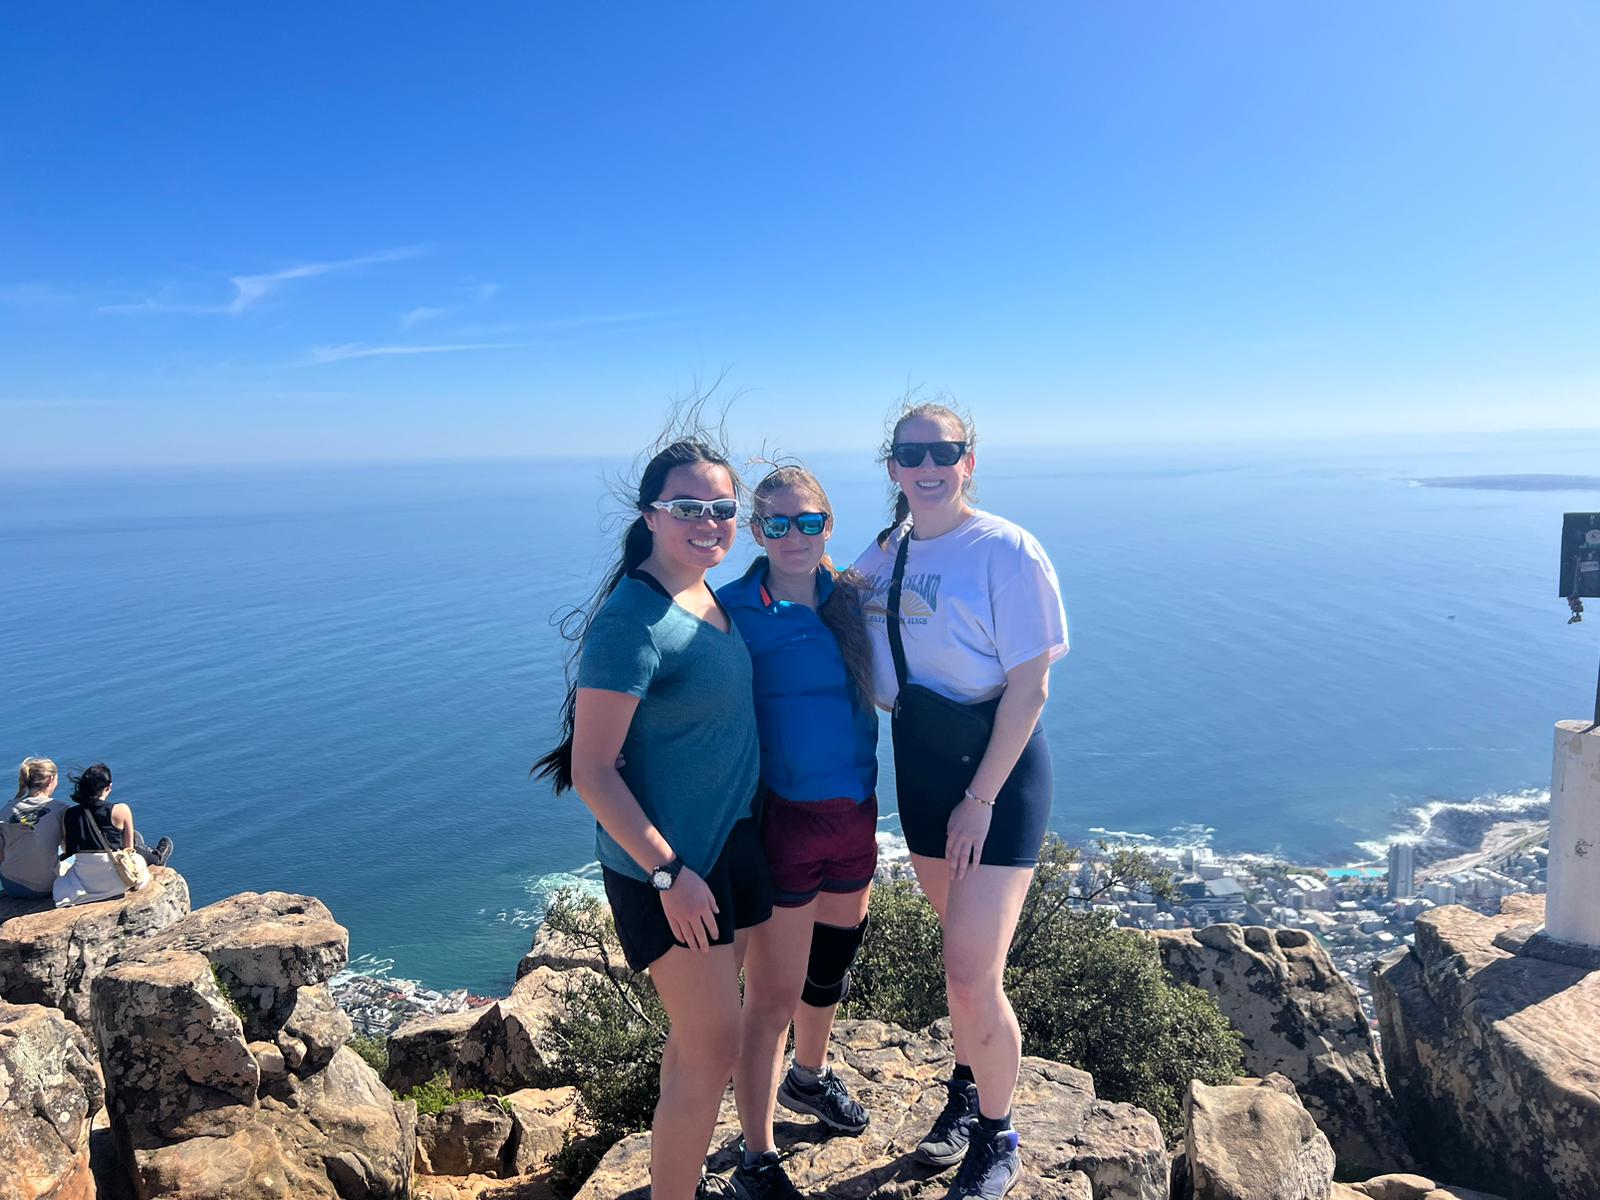 With my friends during a hike to the top of Table Mountain